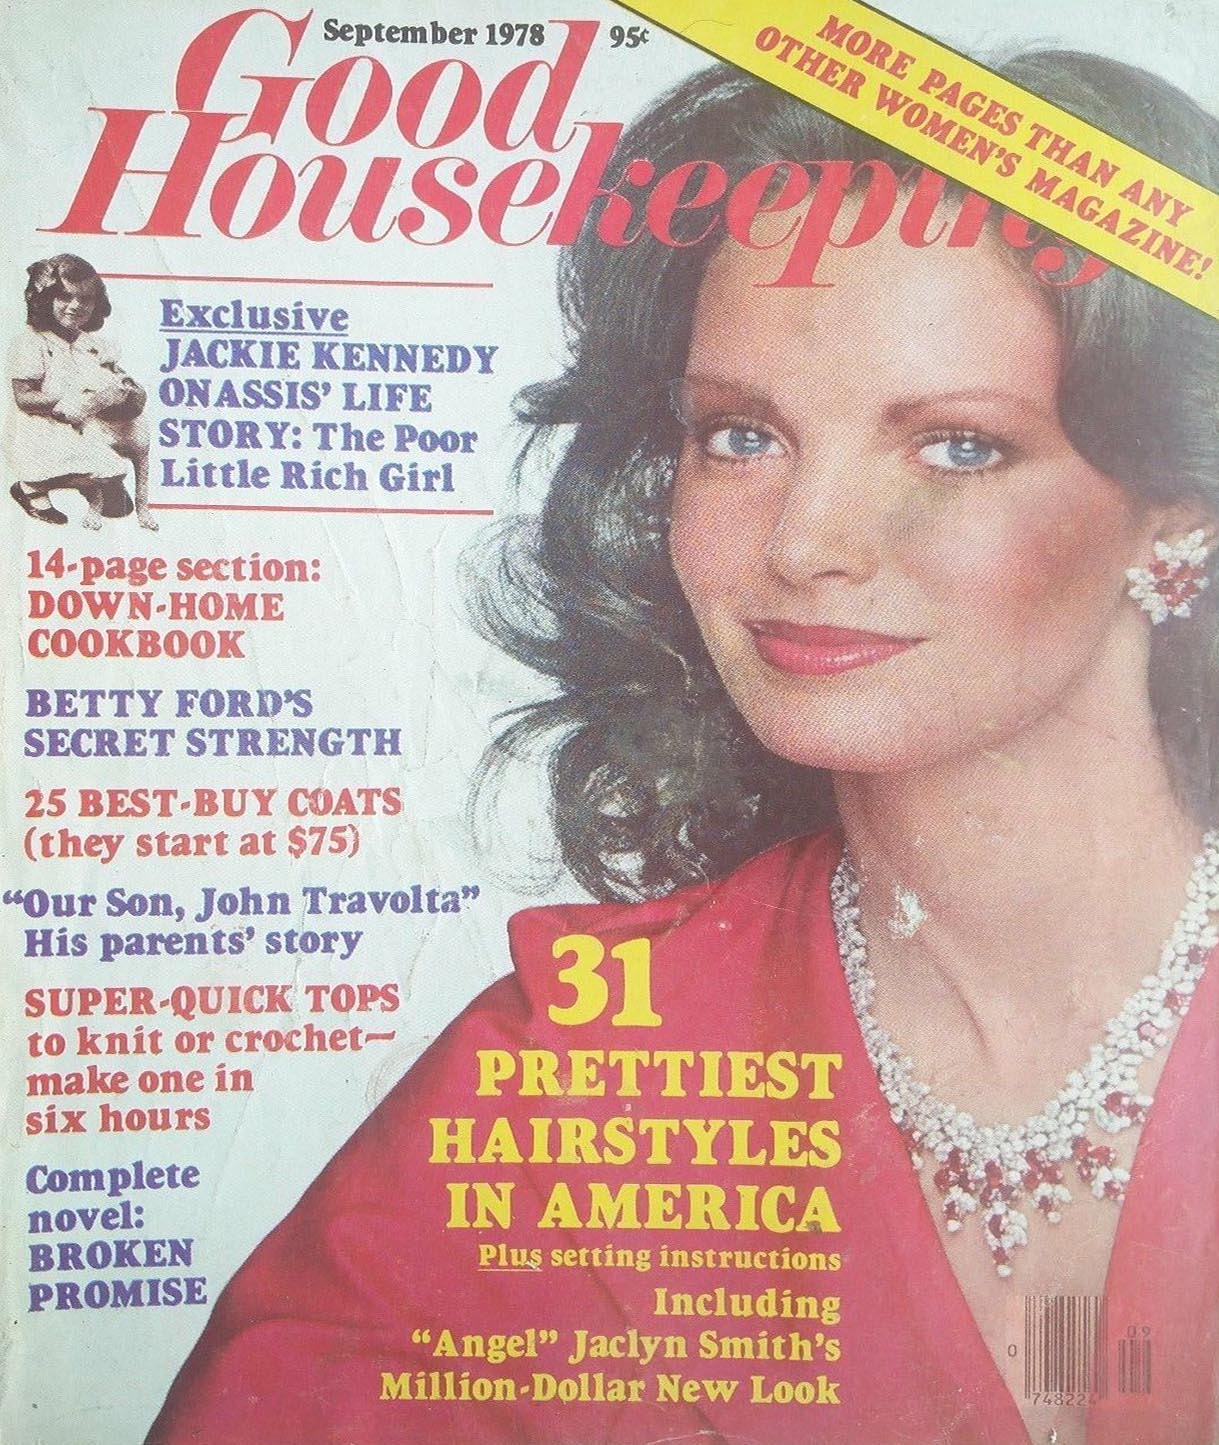 Good Housekeeping September 1978 magazine back issue Good Housekeeping magizine back copy Good Housekeeping September 1978 American womens magazine Back Issue Published by Hearst Publishing Corporation. Exclusive Jackie Kennedy Onassis' Life Story: The Poor Little Rich Girl.